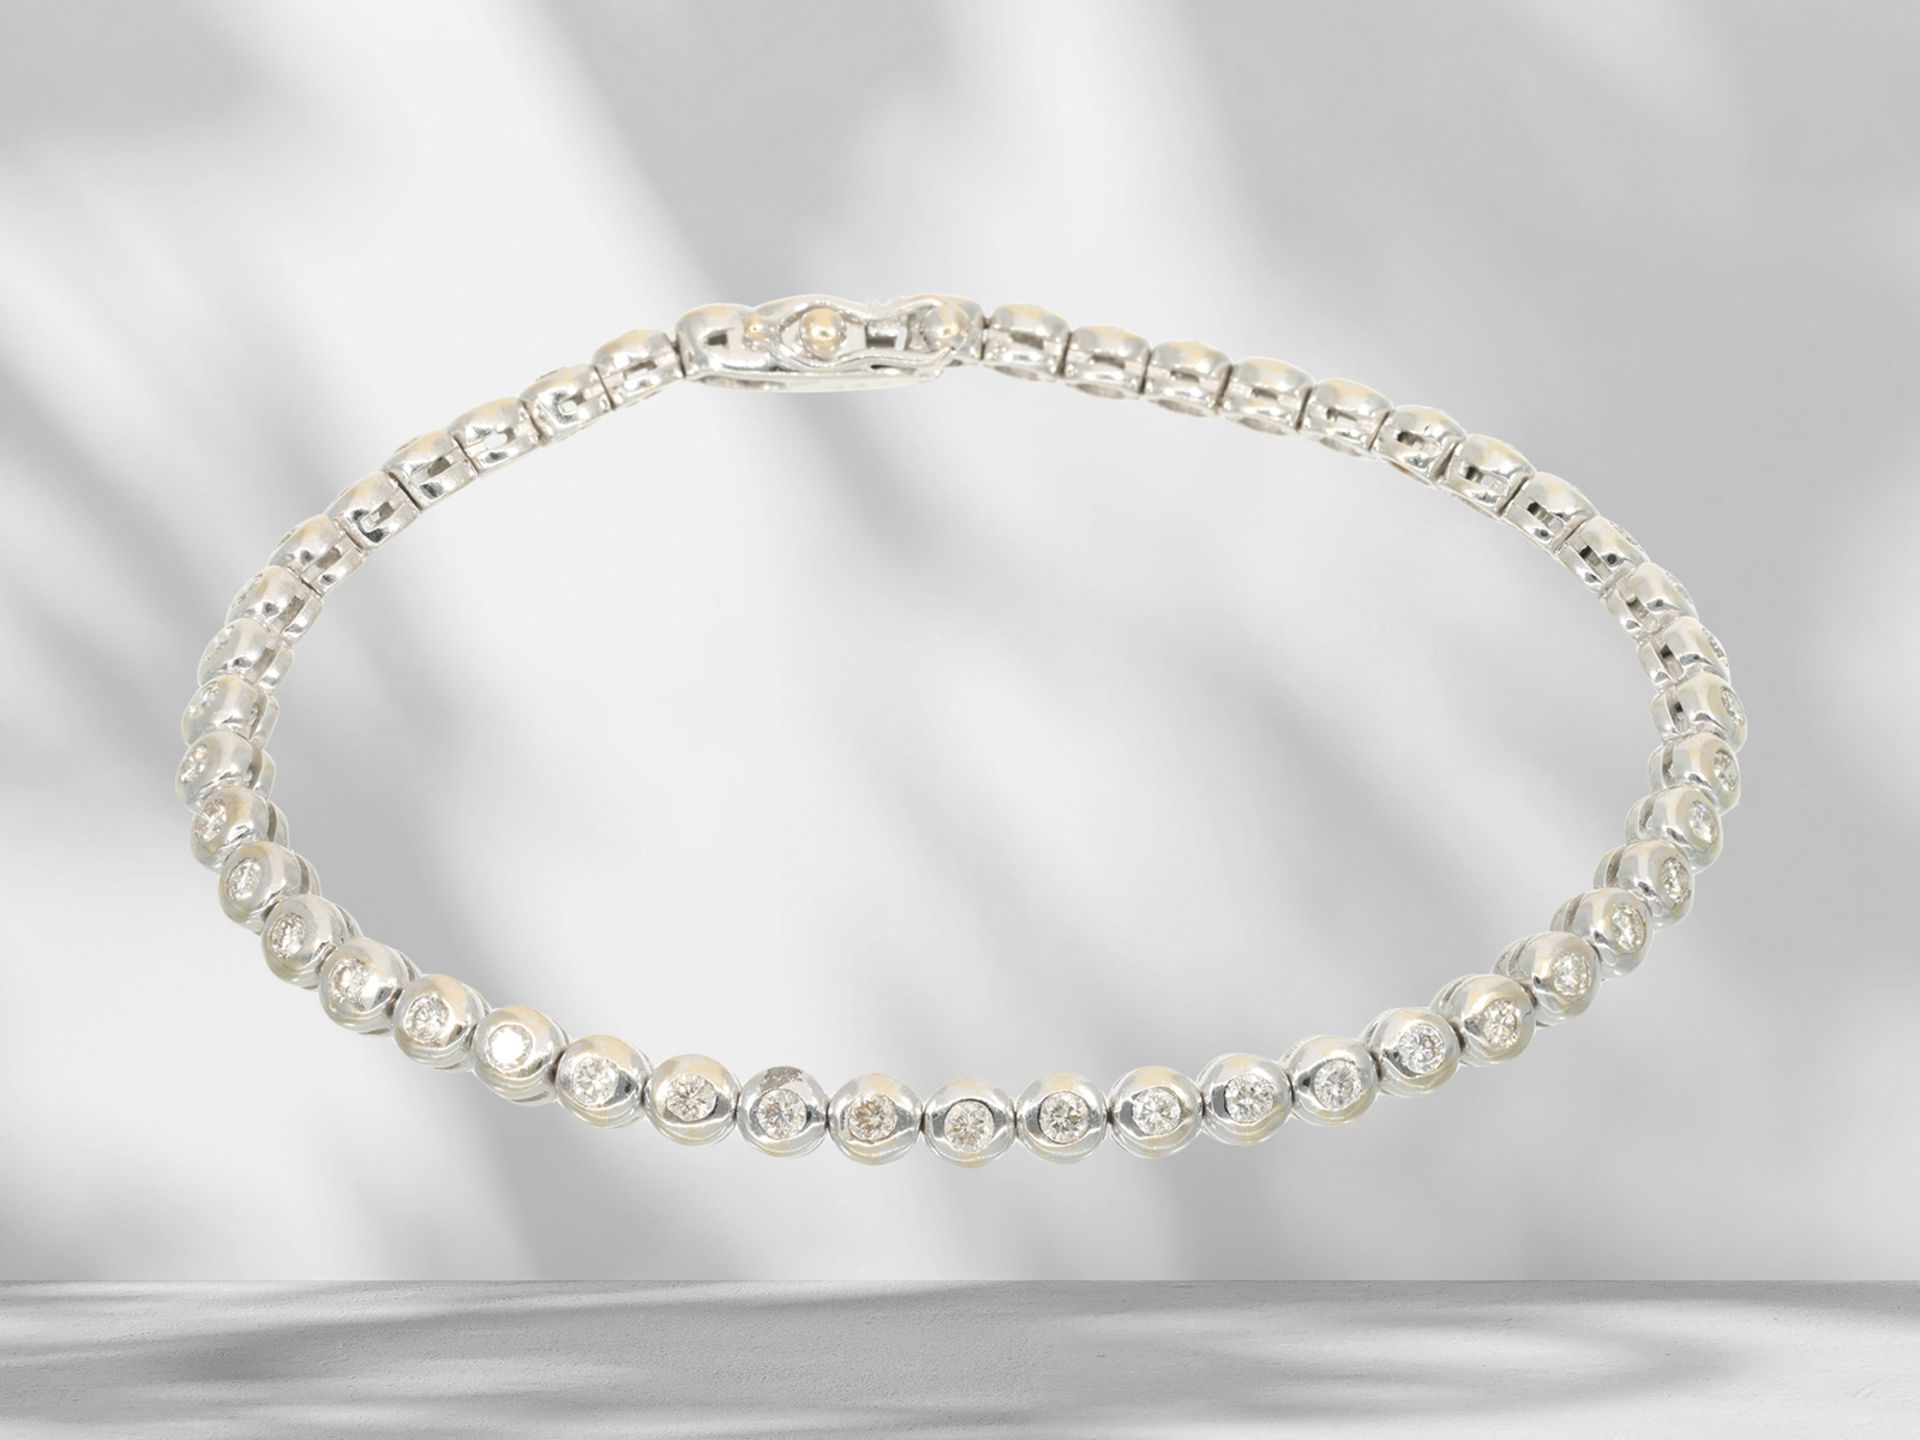 Bracelet: high-quality, handcrafted tennis bracelet with brilliant-cut diamonds, approx. 1.26ct - Image 4 of 4